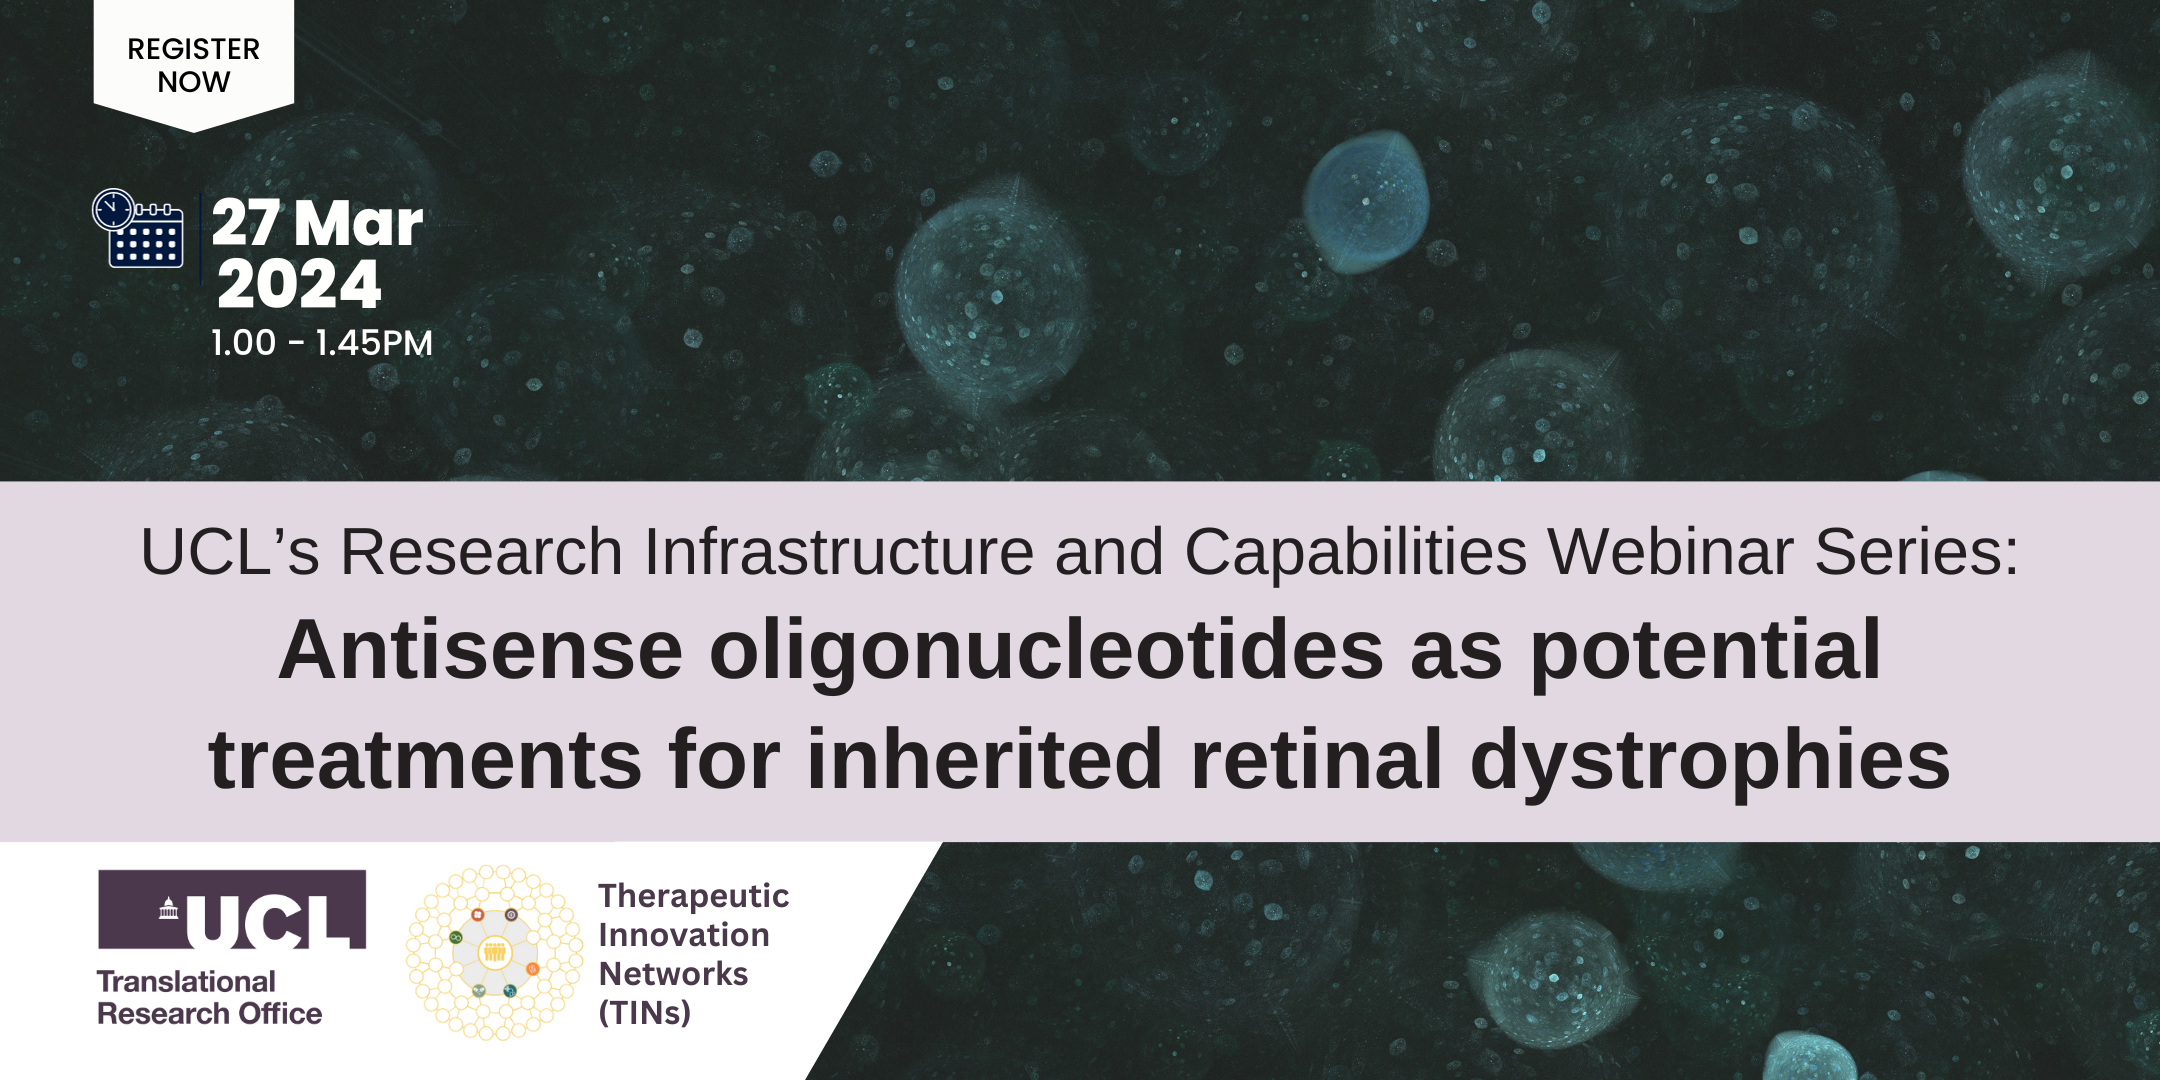 27 Mar 2024◾Webinar: Antisense oligonucleotides as potential treatments for inherited retinal dystrophies